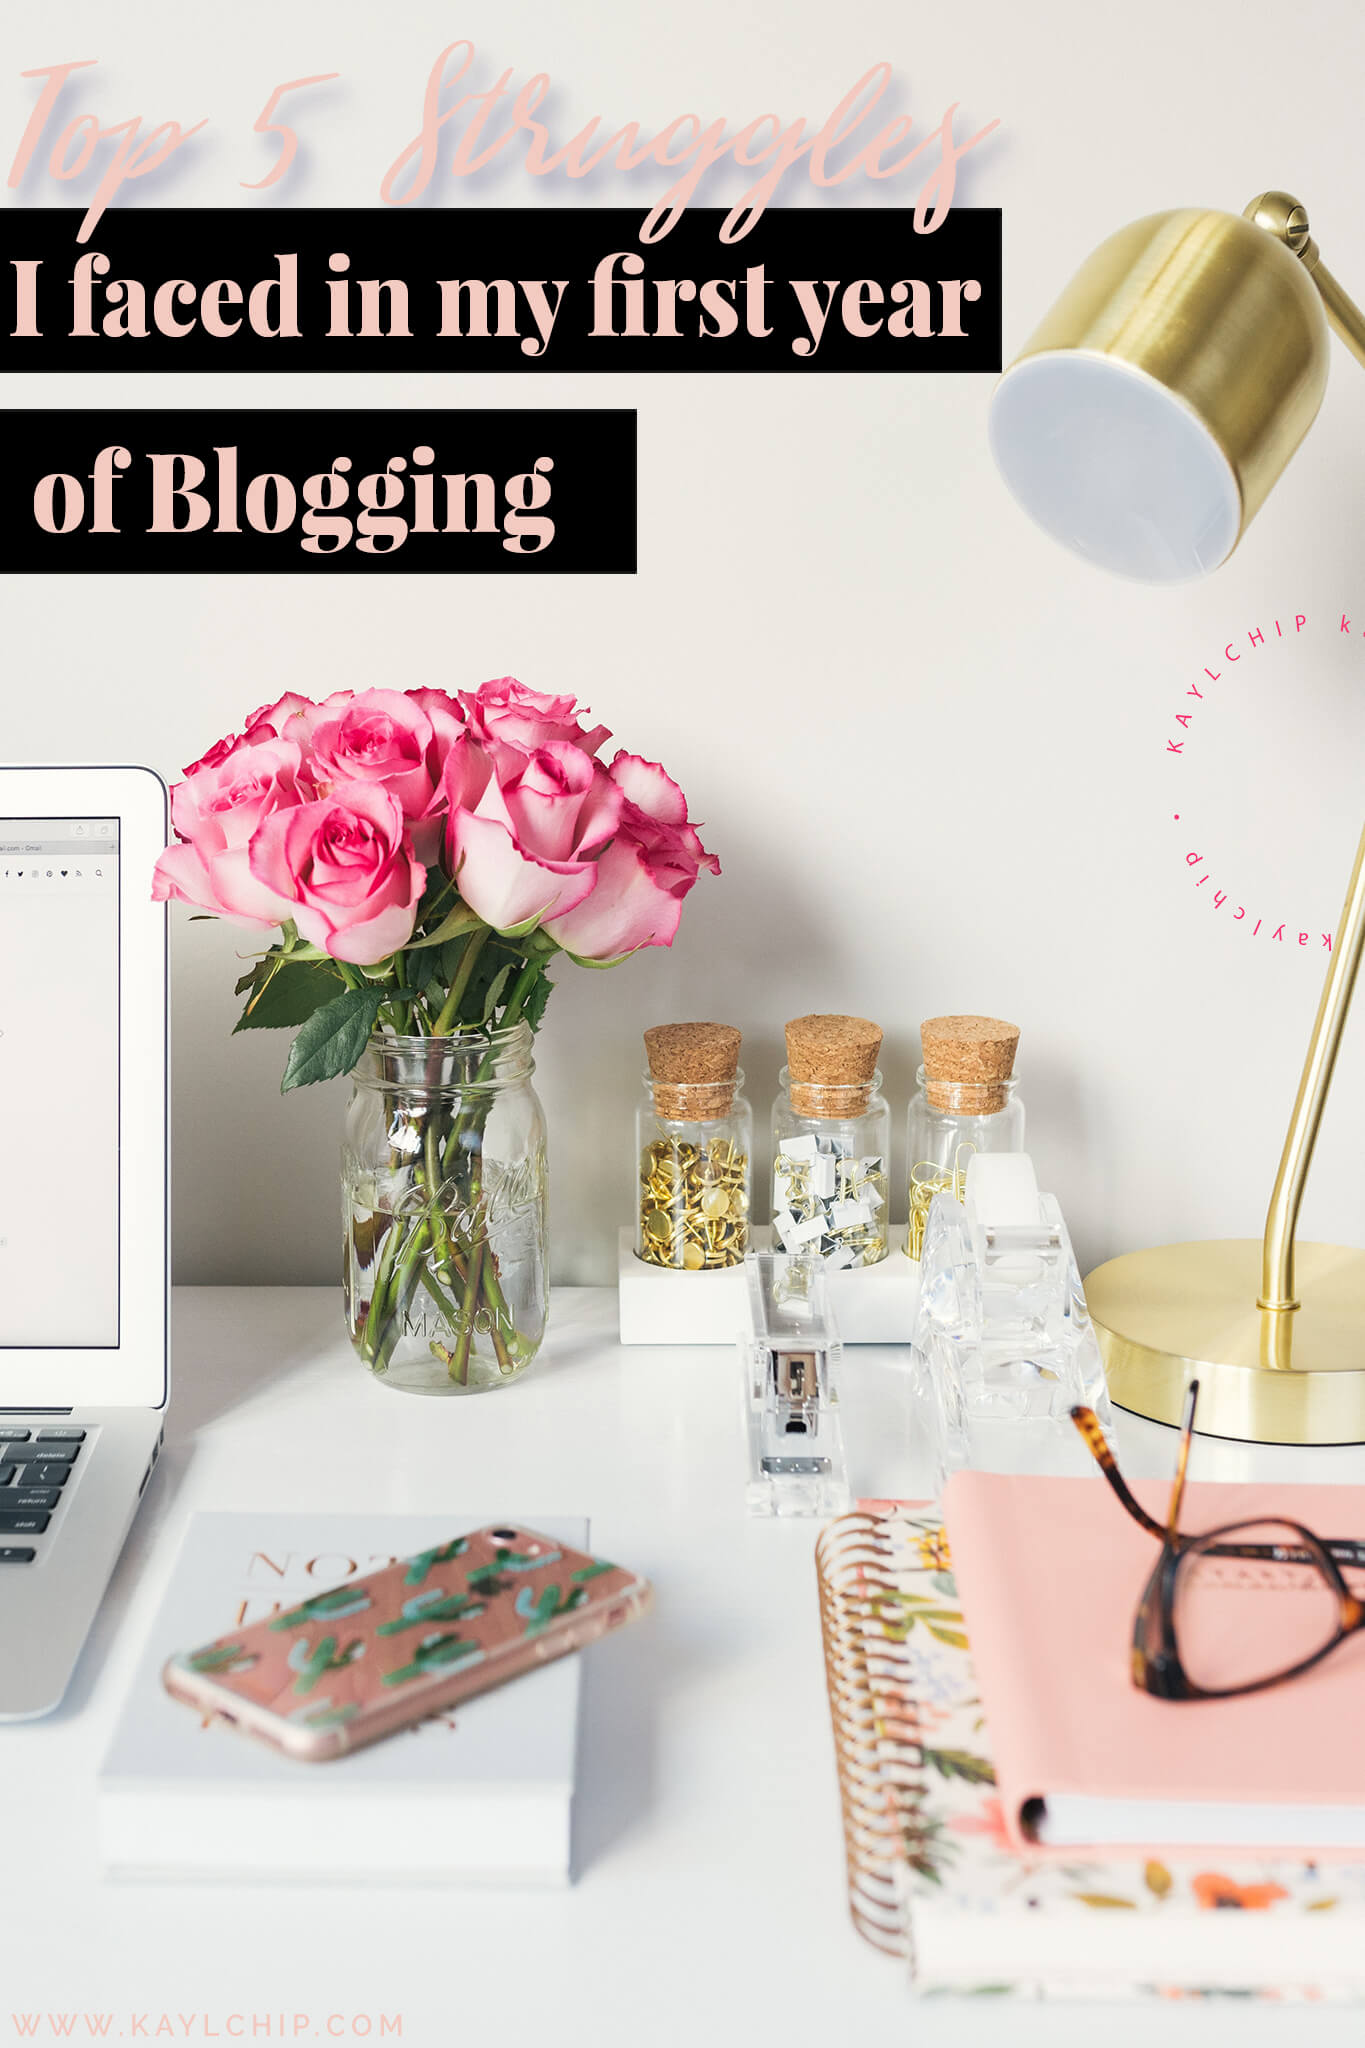 Struggles of First Year of Blogging